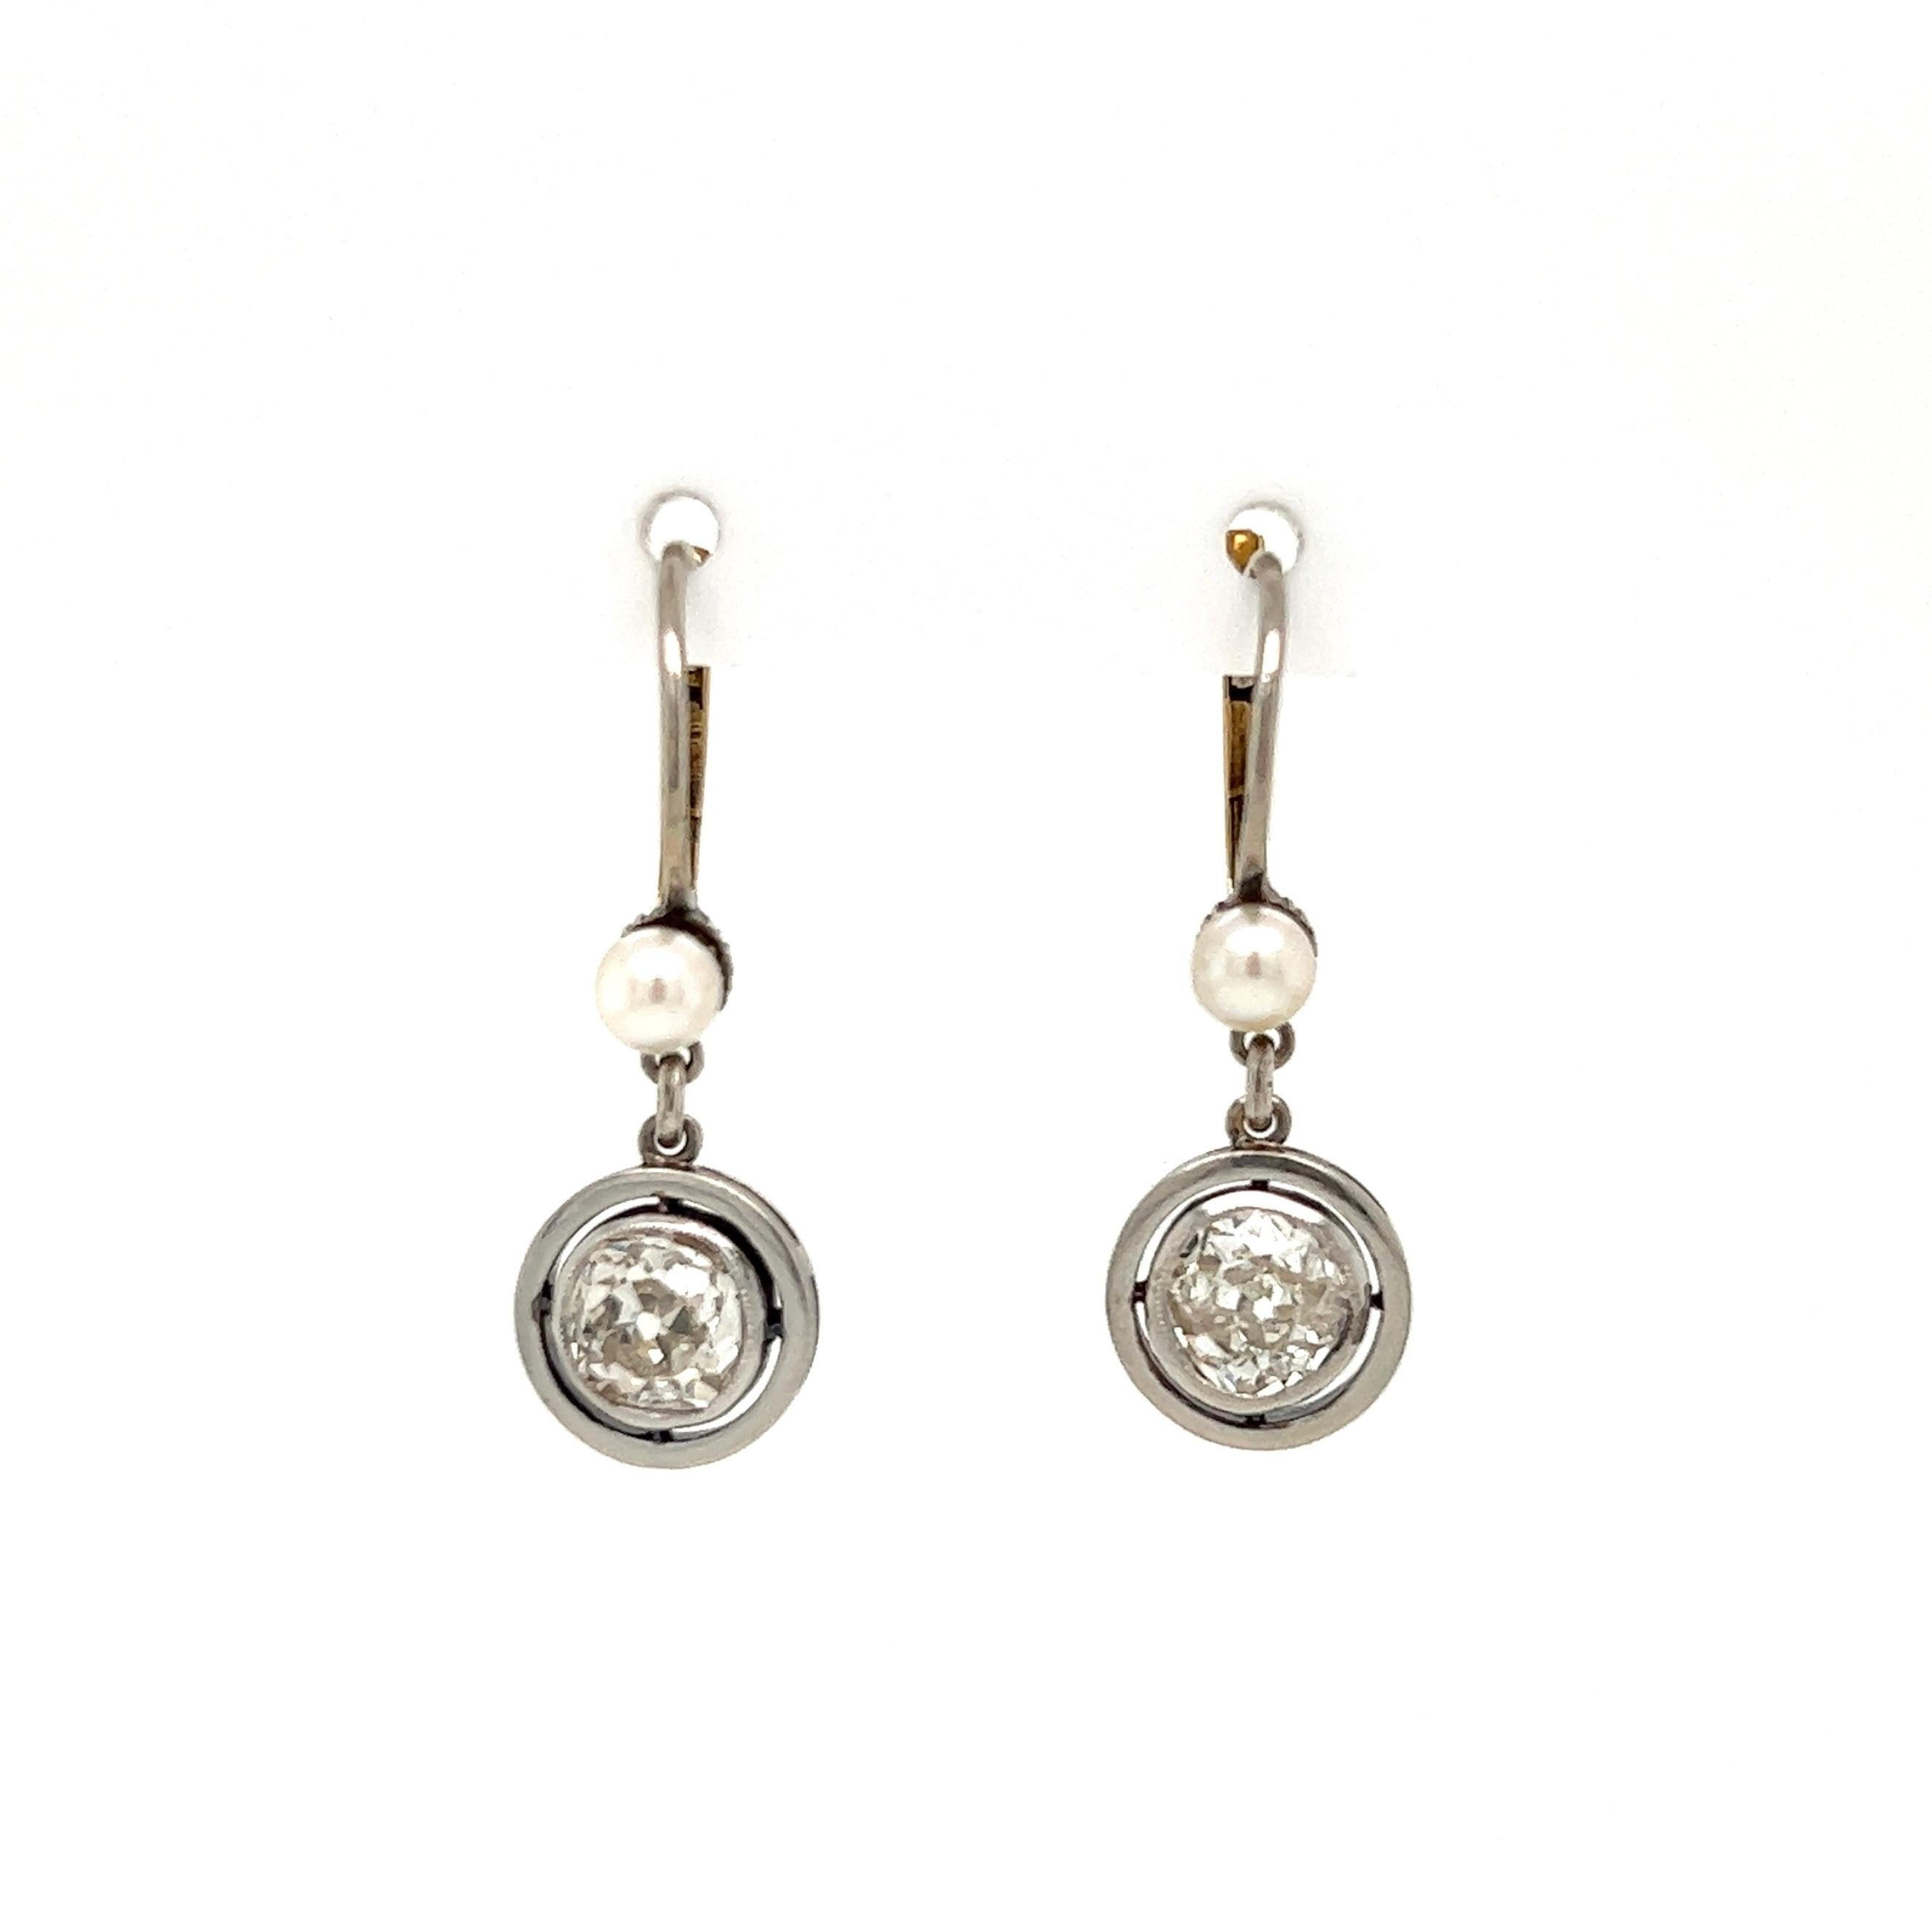 Diamond and Pearl Double Drop Platinum and Gold Earrings Fine Estate Jewelry
Simply Beautiful! Finely detailed Double Drop Platinum Earrings. Bezel set with Diamonds weighing approx.1.20tcw, Color K; clarity: SI1/SI2. Each earring suspended from a